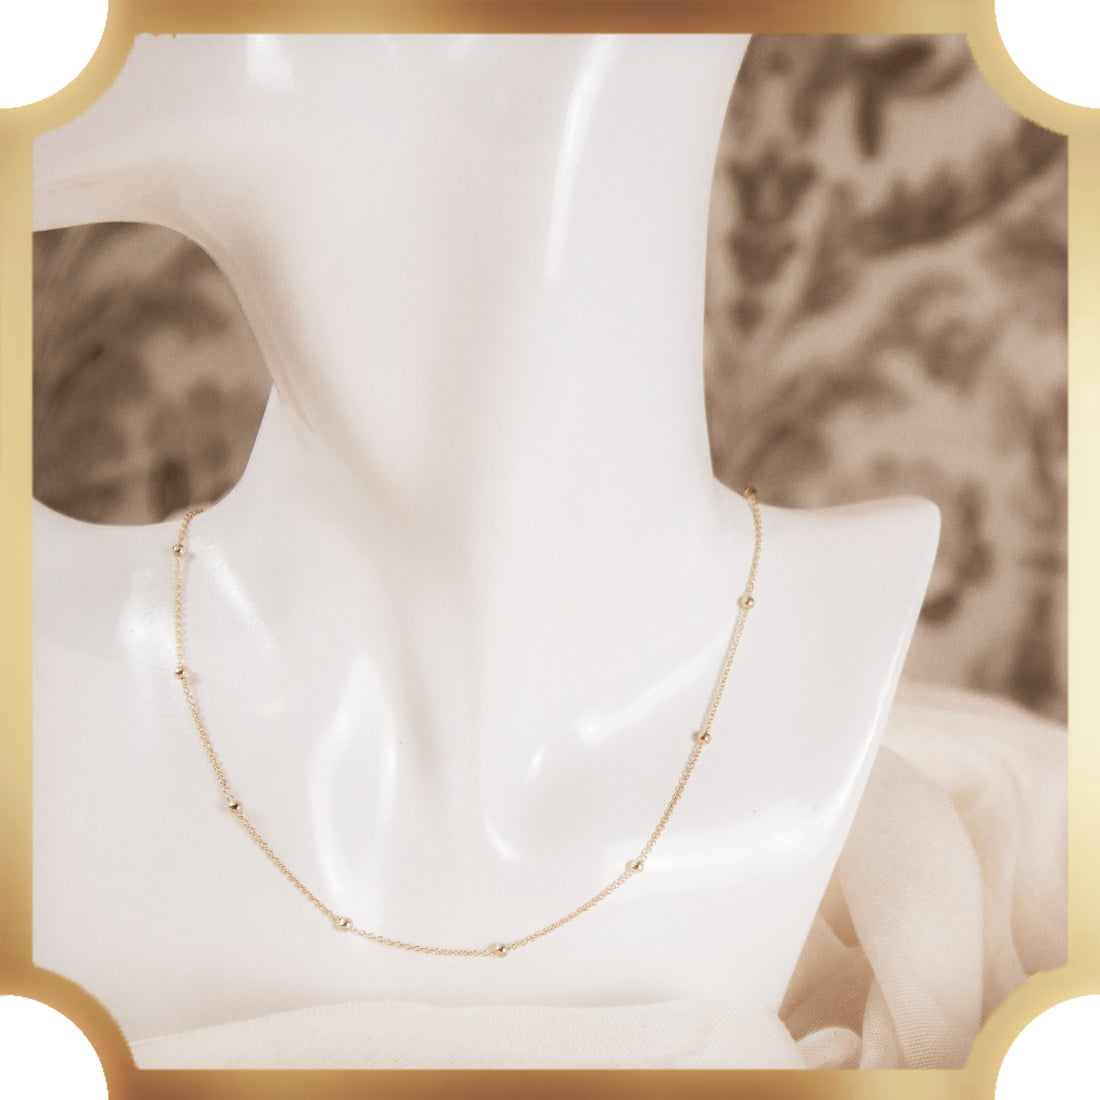  the basics jewelry collection a pleasant thought